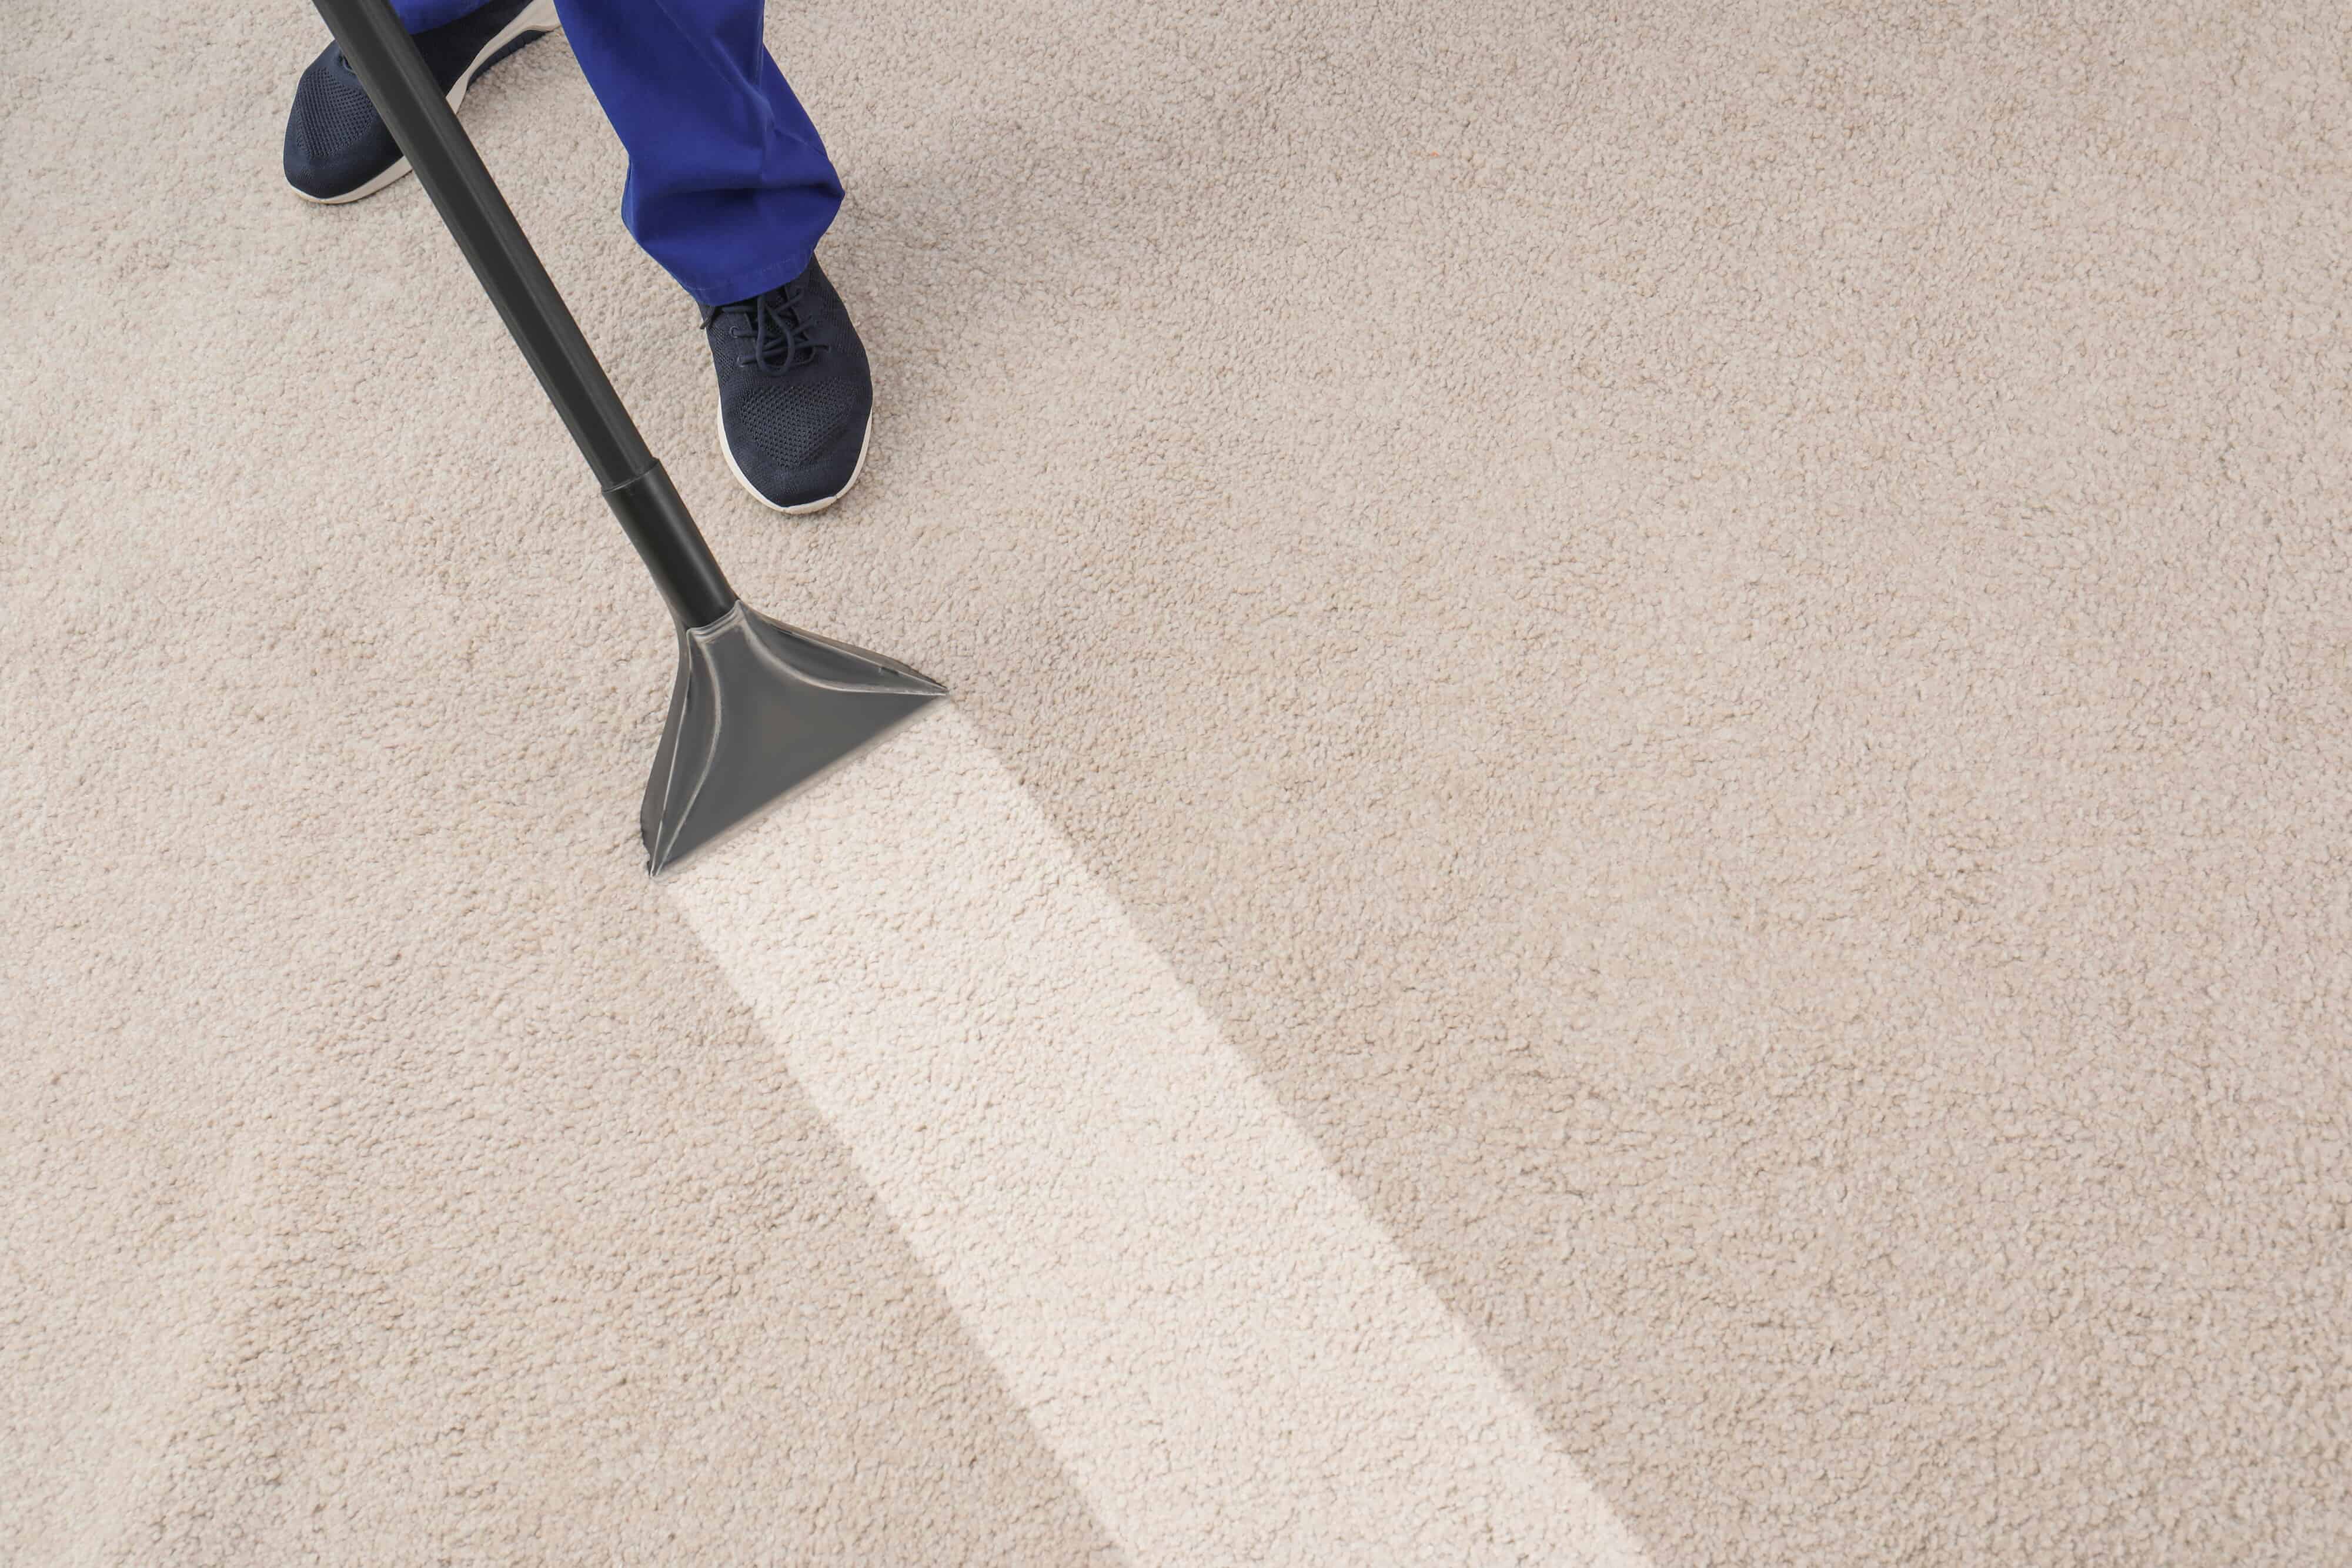 7 Tips For Drying Wet Carpet And Preventing Mold Growth - Carpet to Go